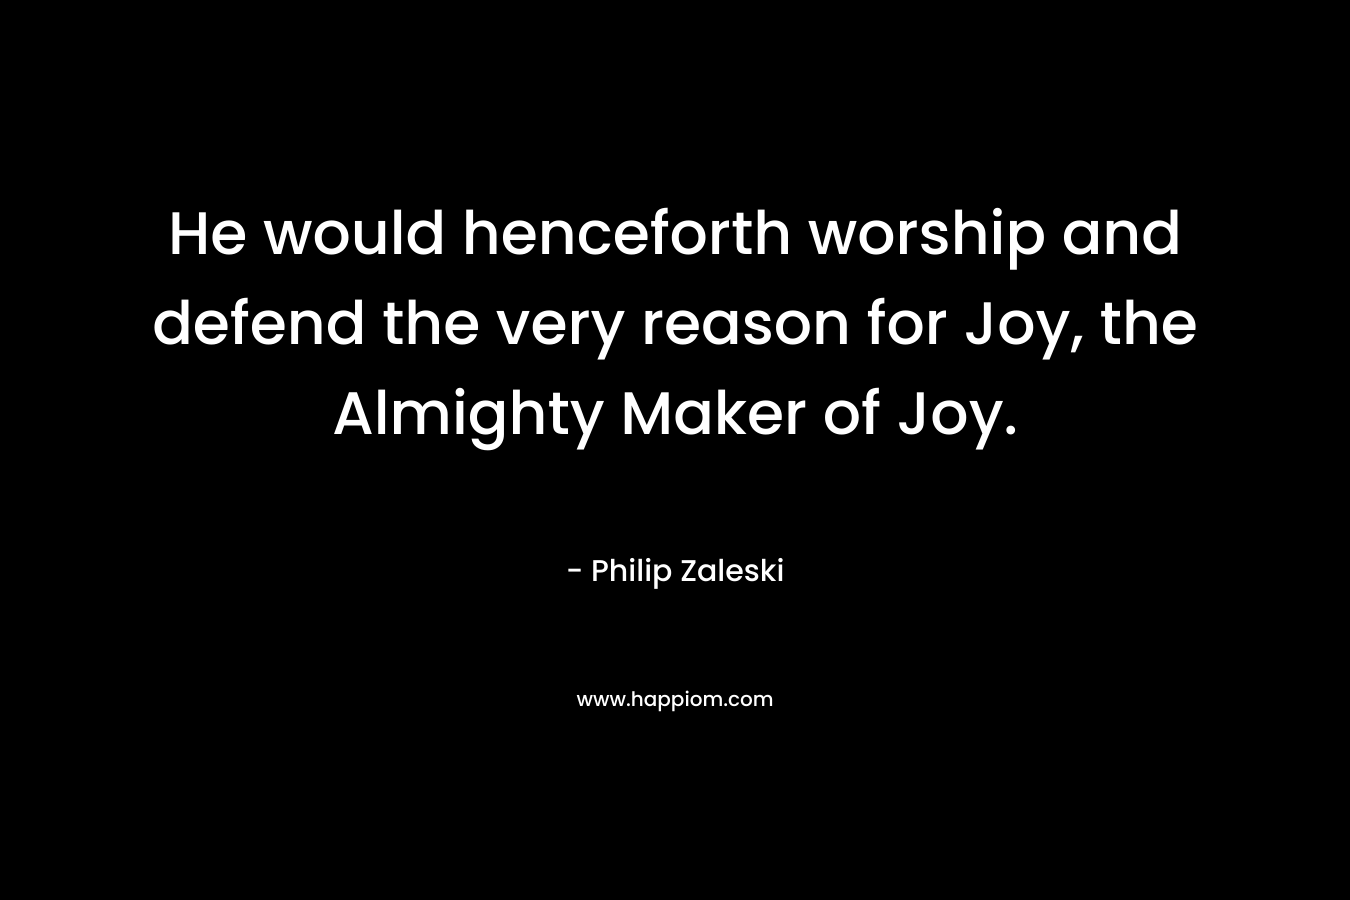 He would henceforth worship and defend the very reason for Joy, the Almighty Maker of Joy. – Philip Zaleski